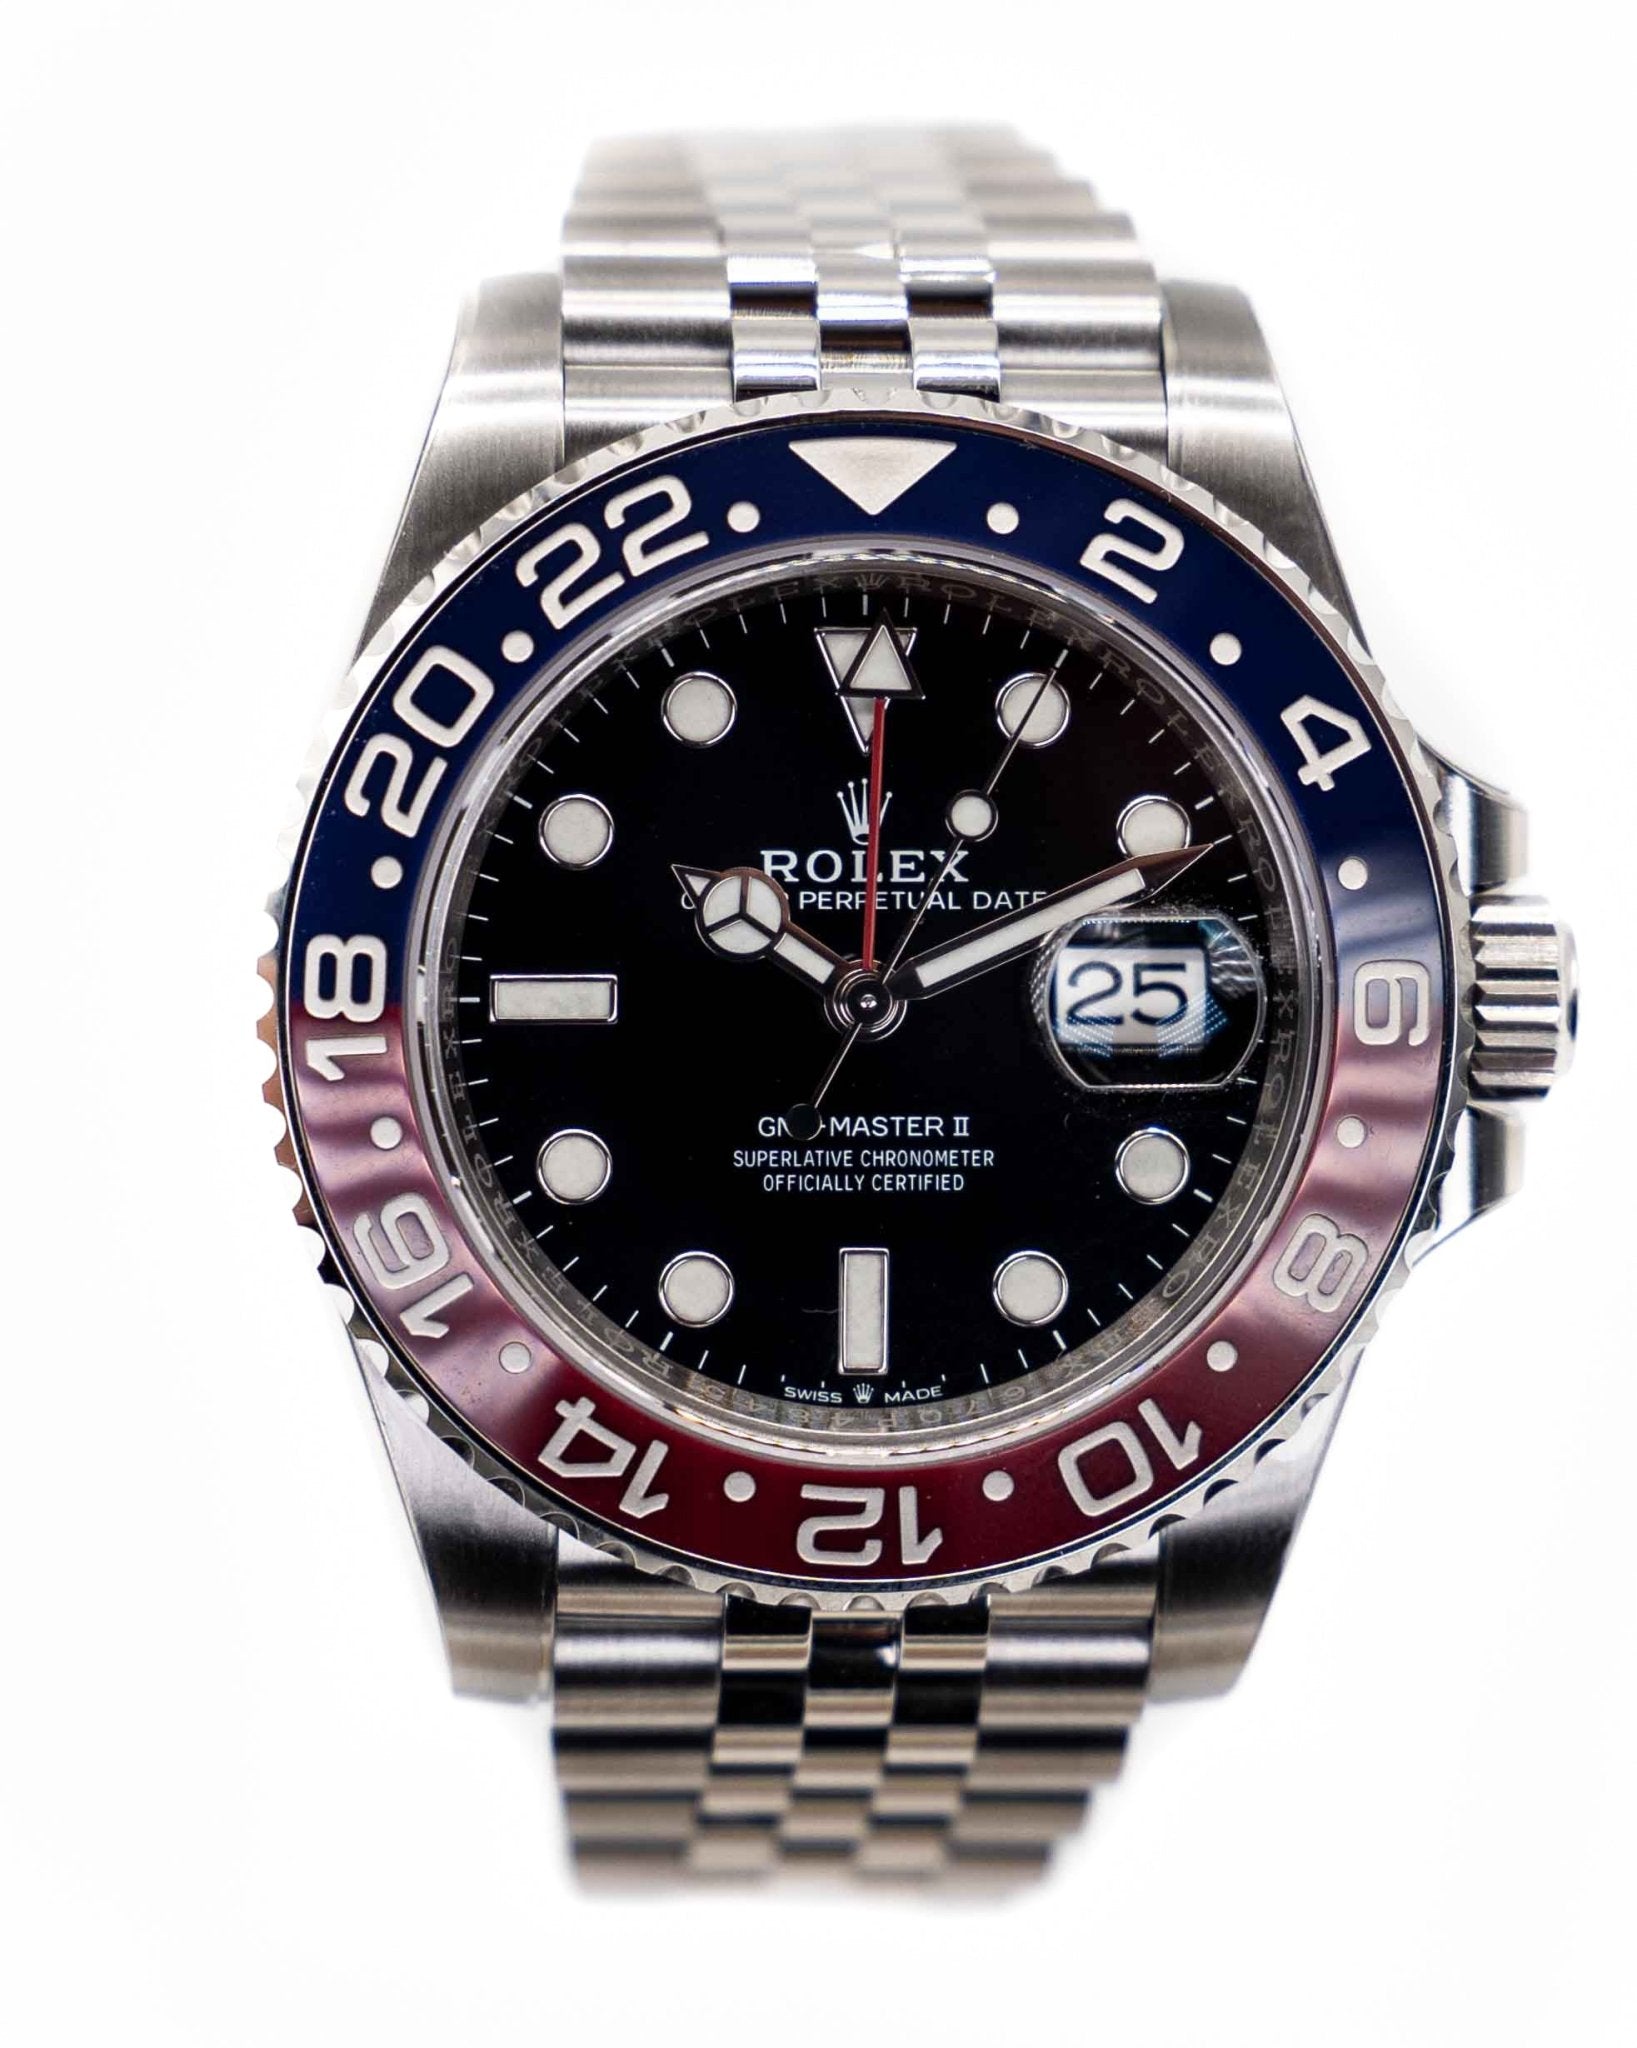 Rolex GMT Master II 126710 Jubilee Watch Protection Kit - The Watch Protect Company